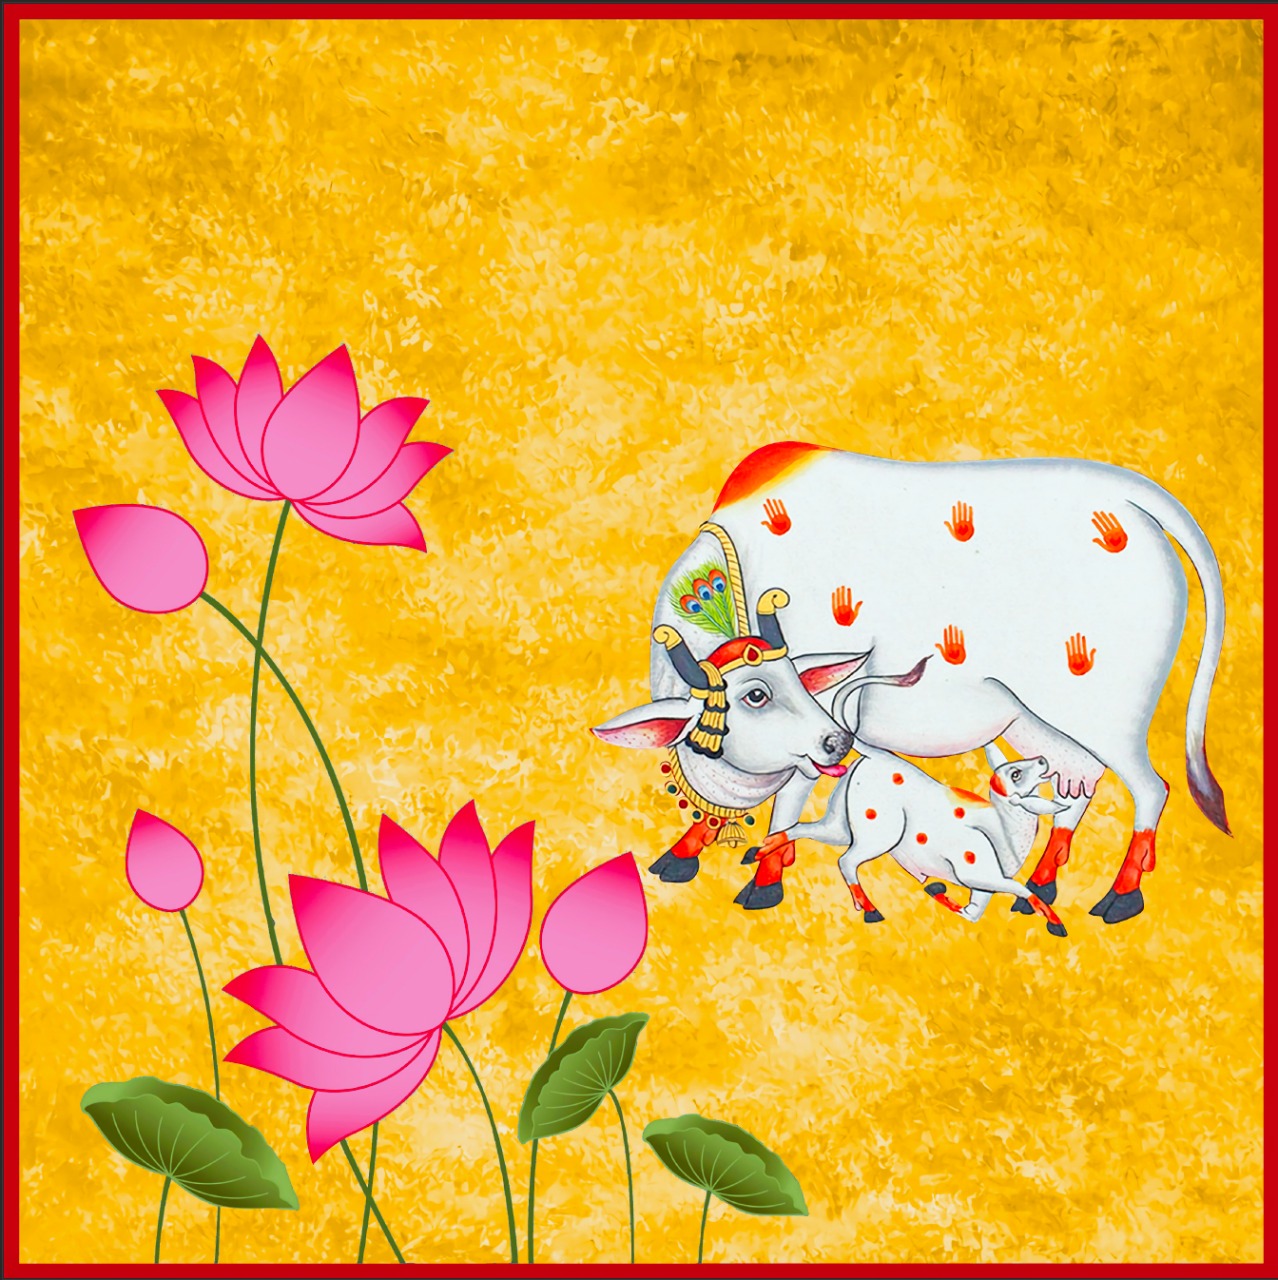 A Pichwai cow background with a floral appearance